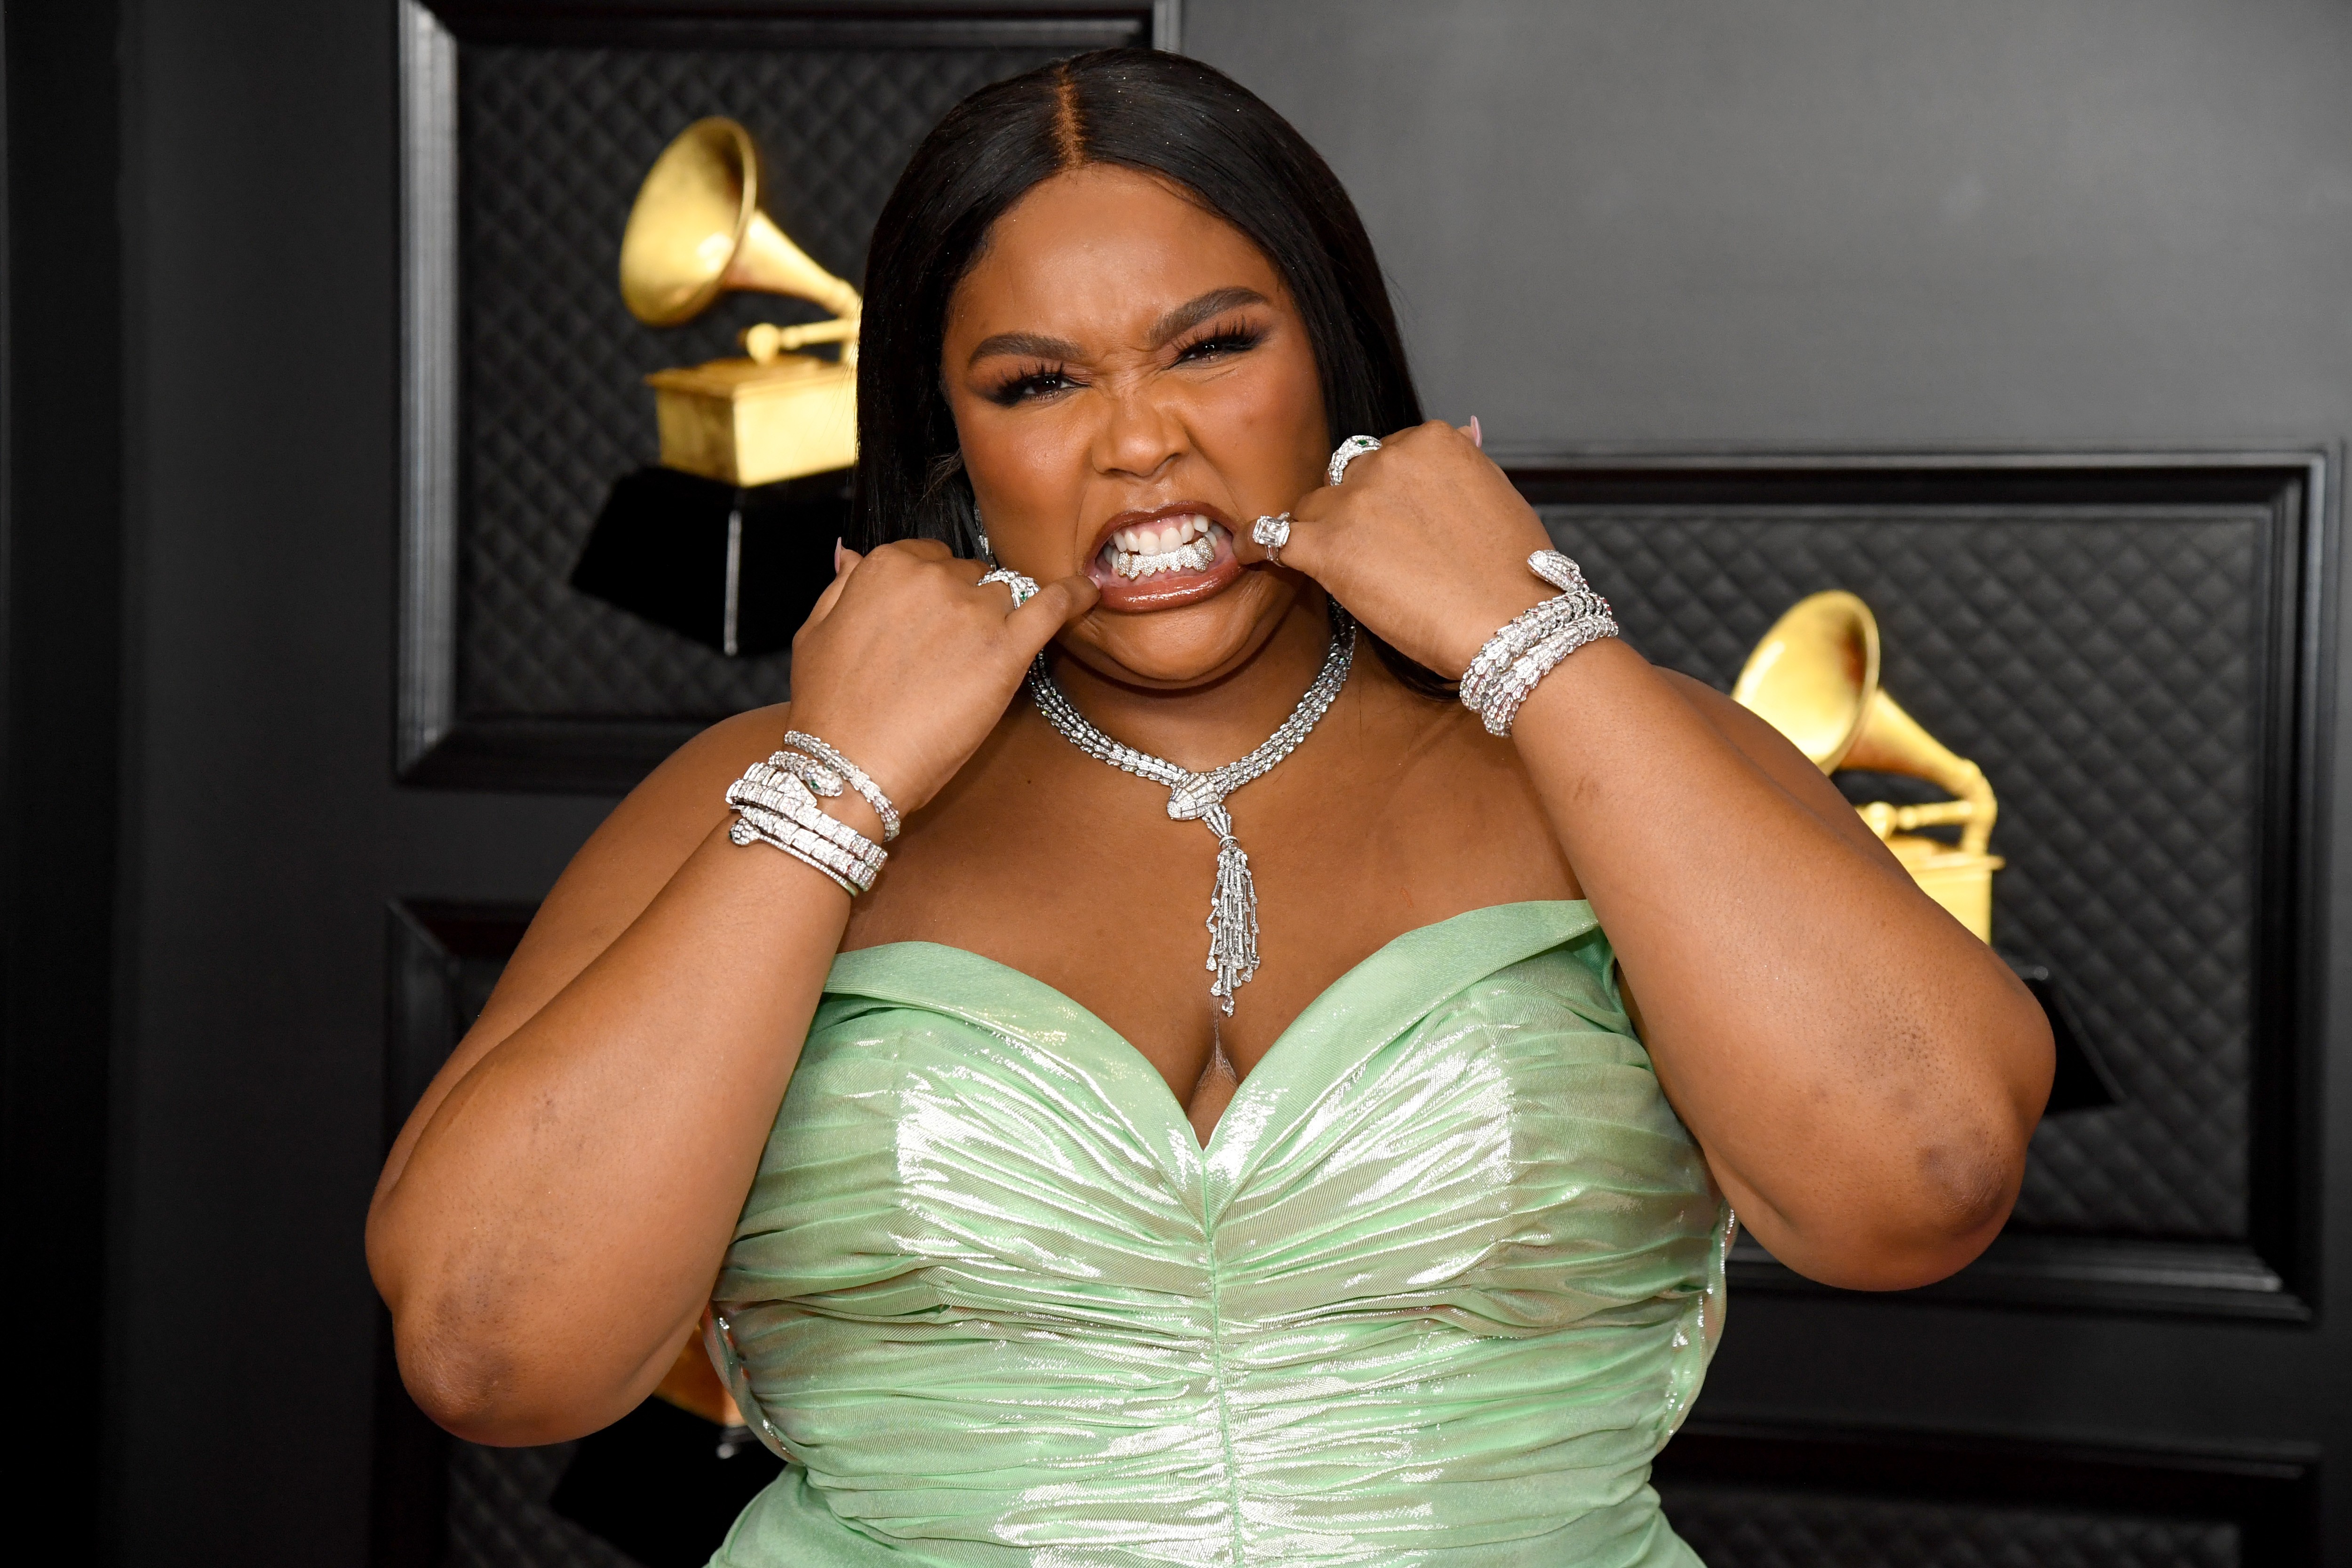 LOS ANGELES, CALIFORNIA - MARCH 14: Lizzo attends the 63rd Annual GRAMMY Awards at Los Angeles Convention Center on March 14, 2021 in Los Angeles, California. (Photo by Kevin Mazur/Getty Images for The Recording Academy ) (Foto: Getty Images for The Recording A)